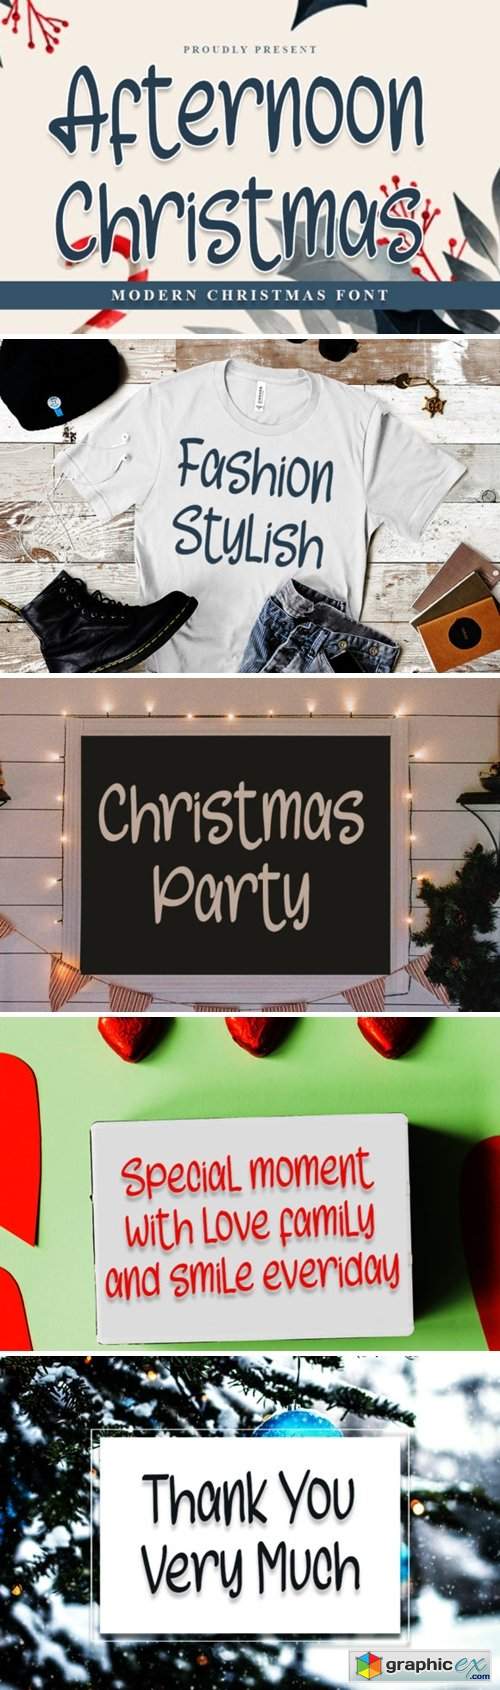  Afternoon Christmas Font 